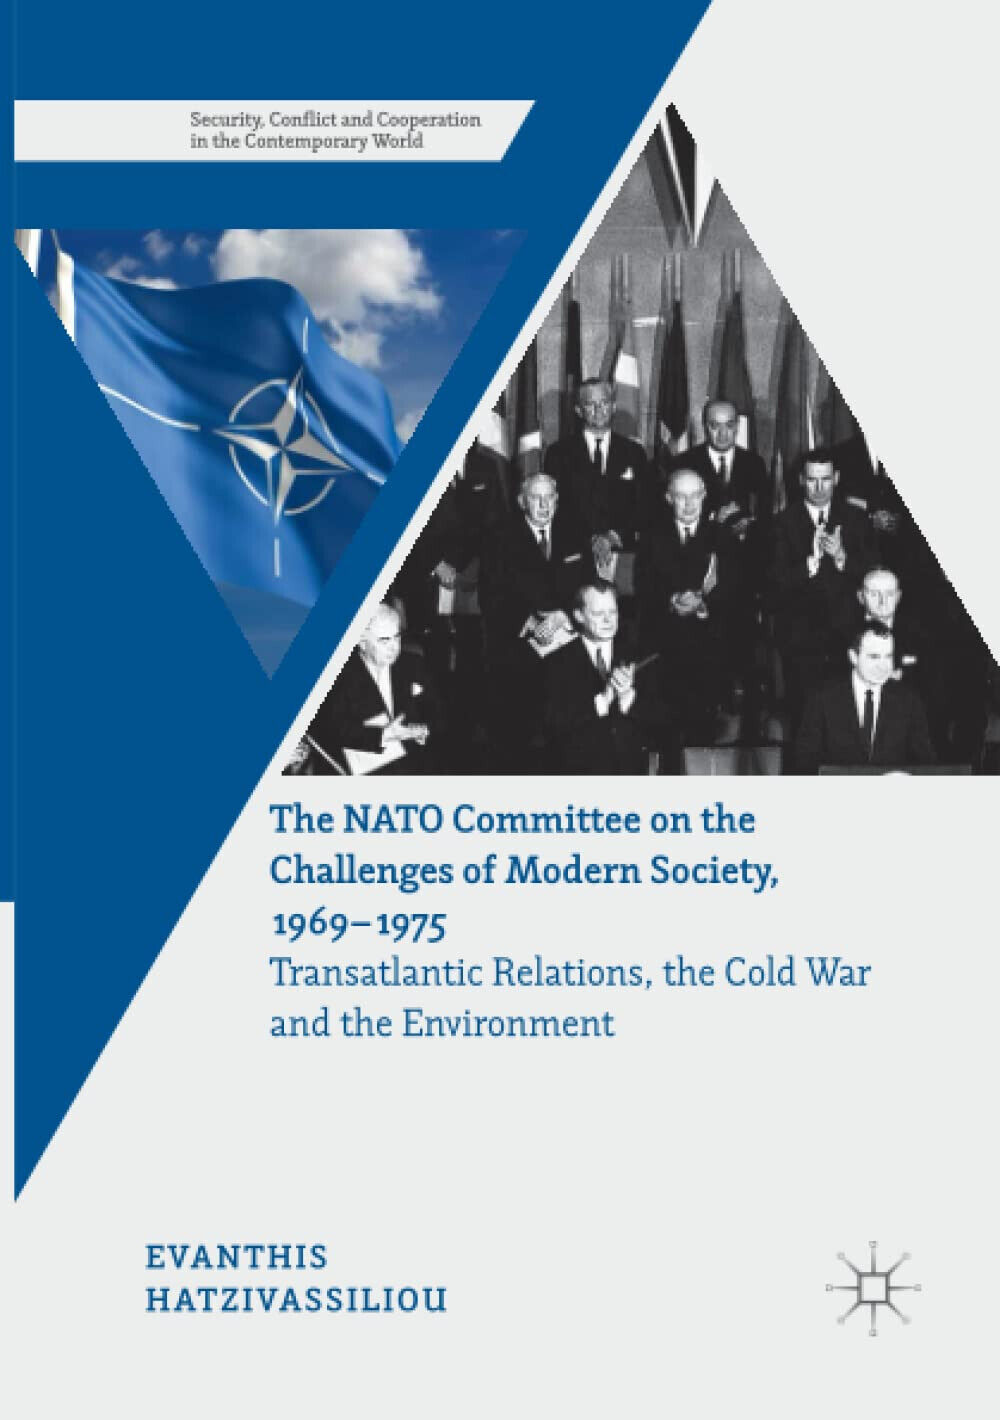 The NATO Committee on the Challenges of Modern Society, 1969-1975-Palgrave, 2018